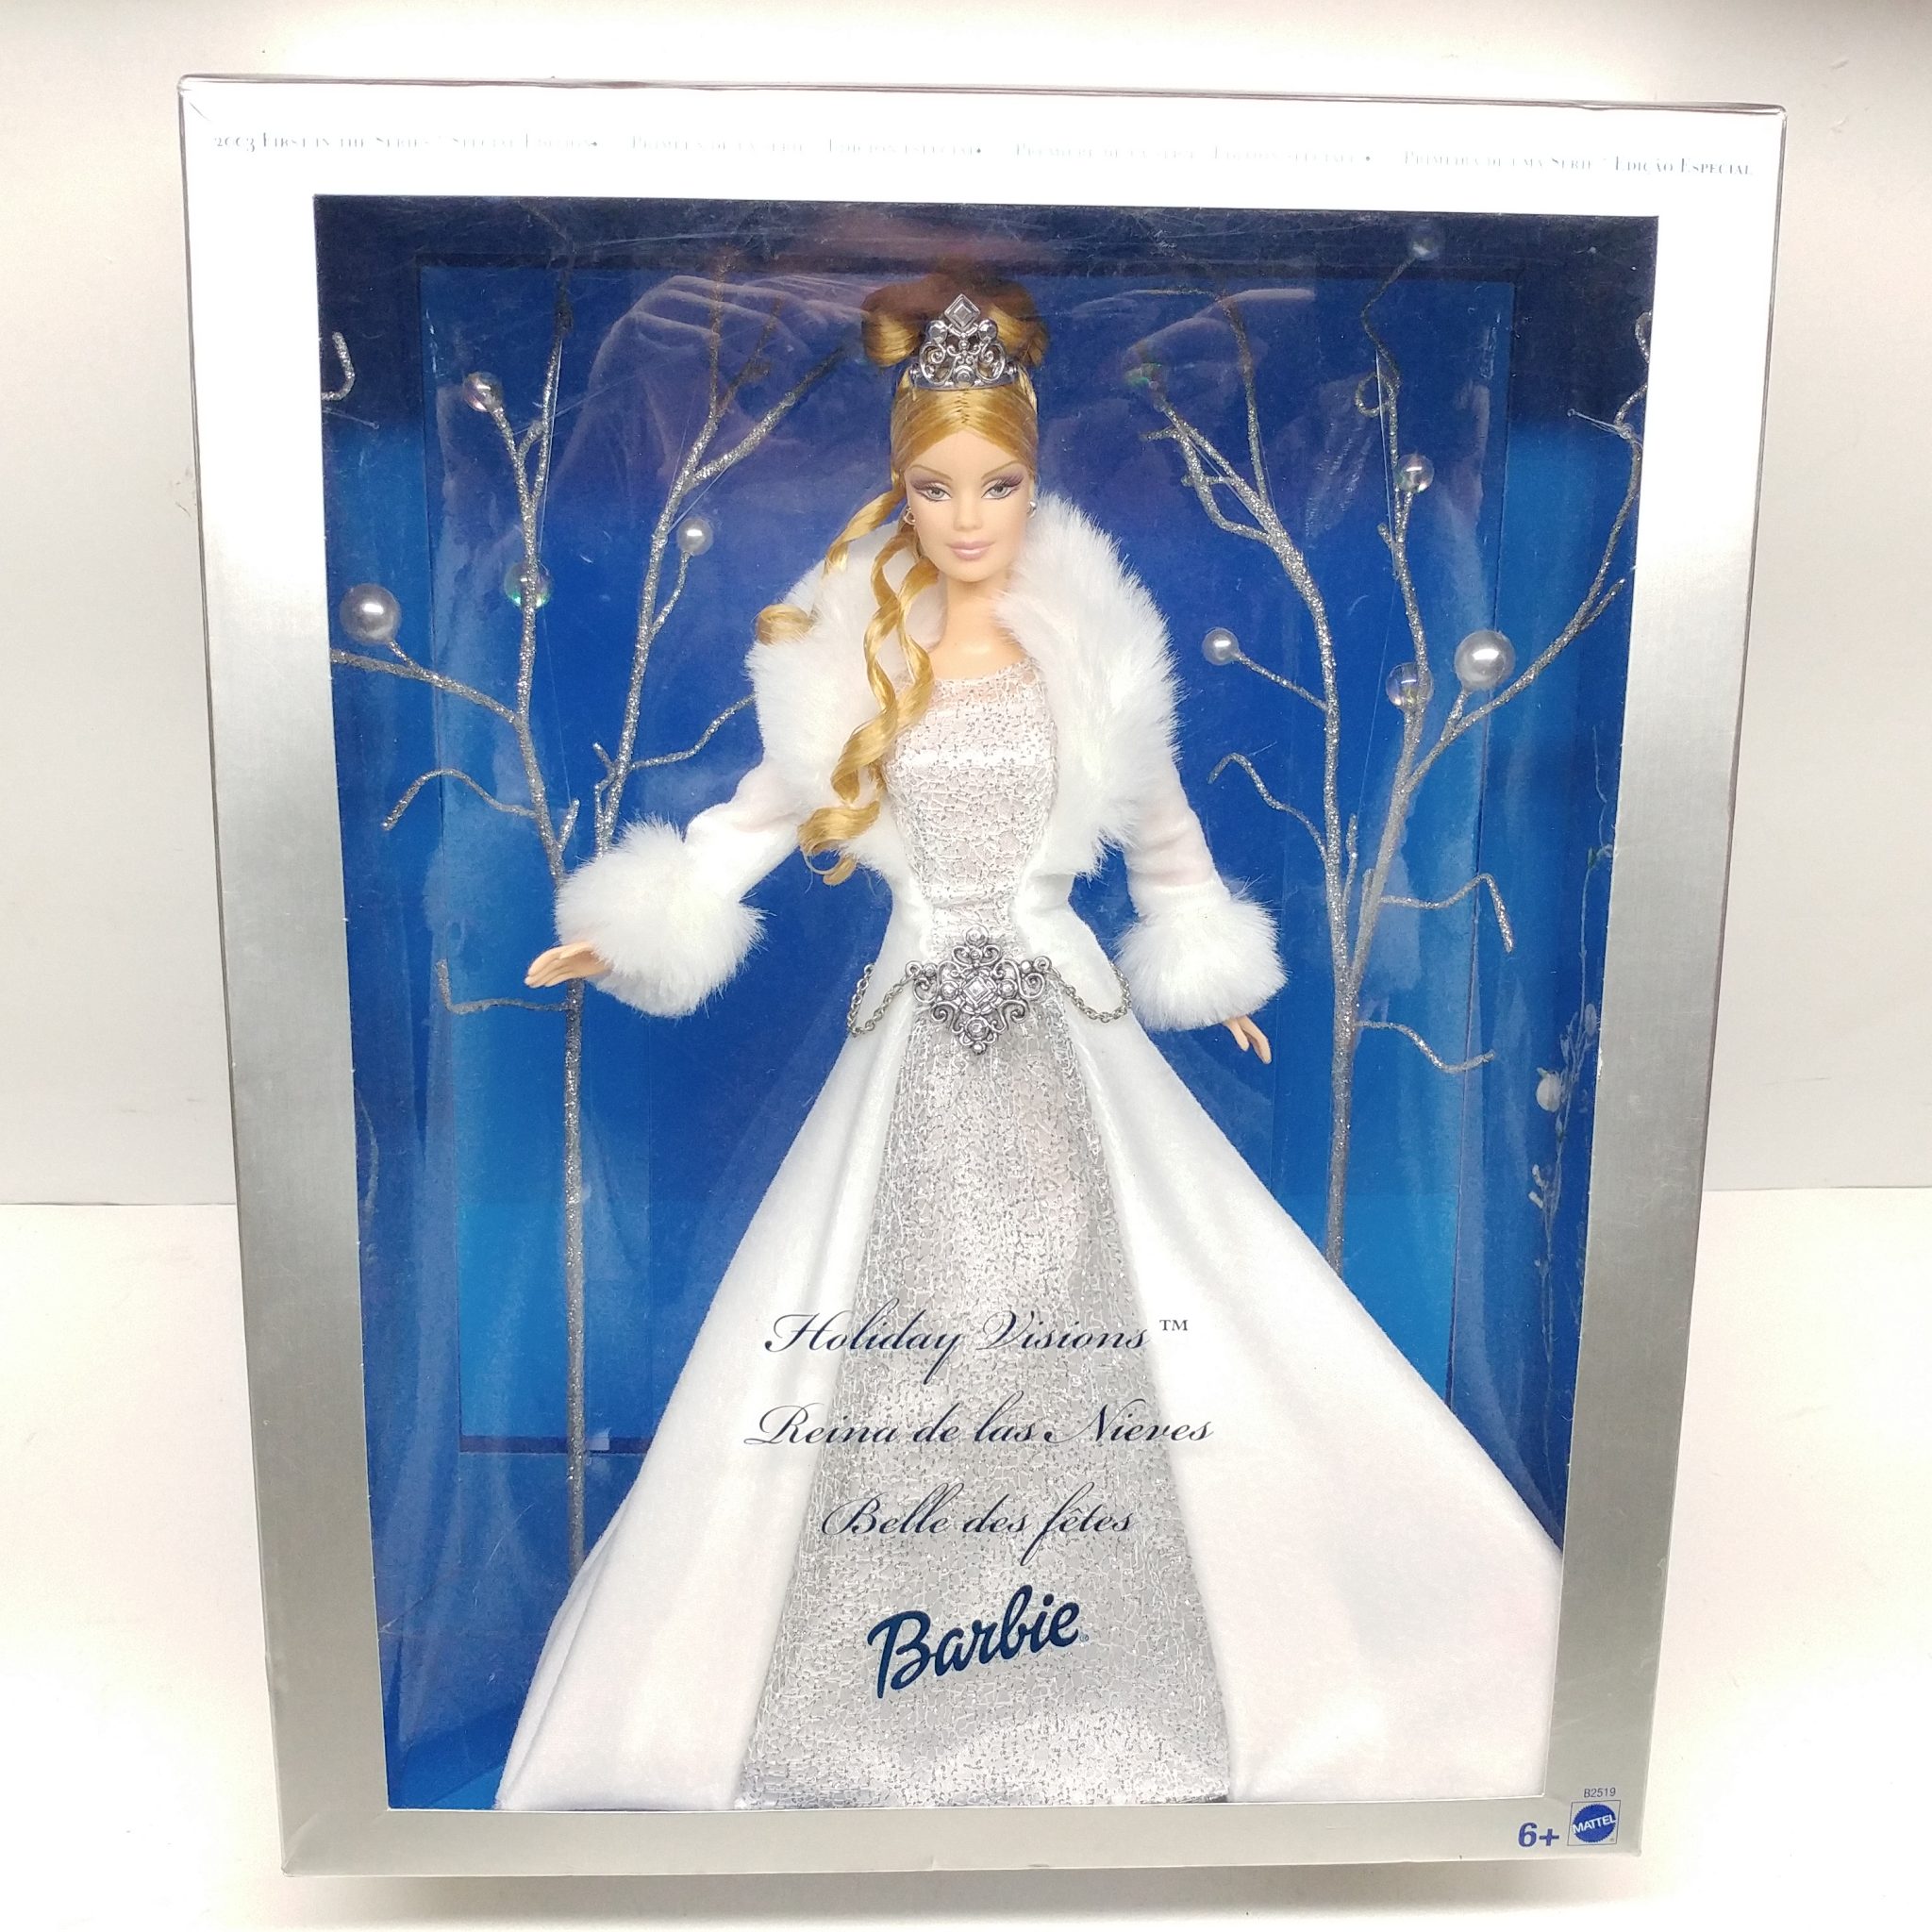 barbie holiday visions 2003